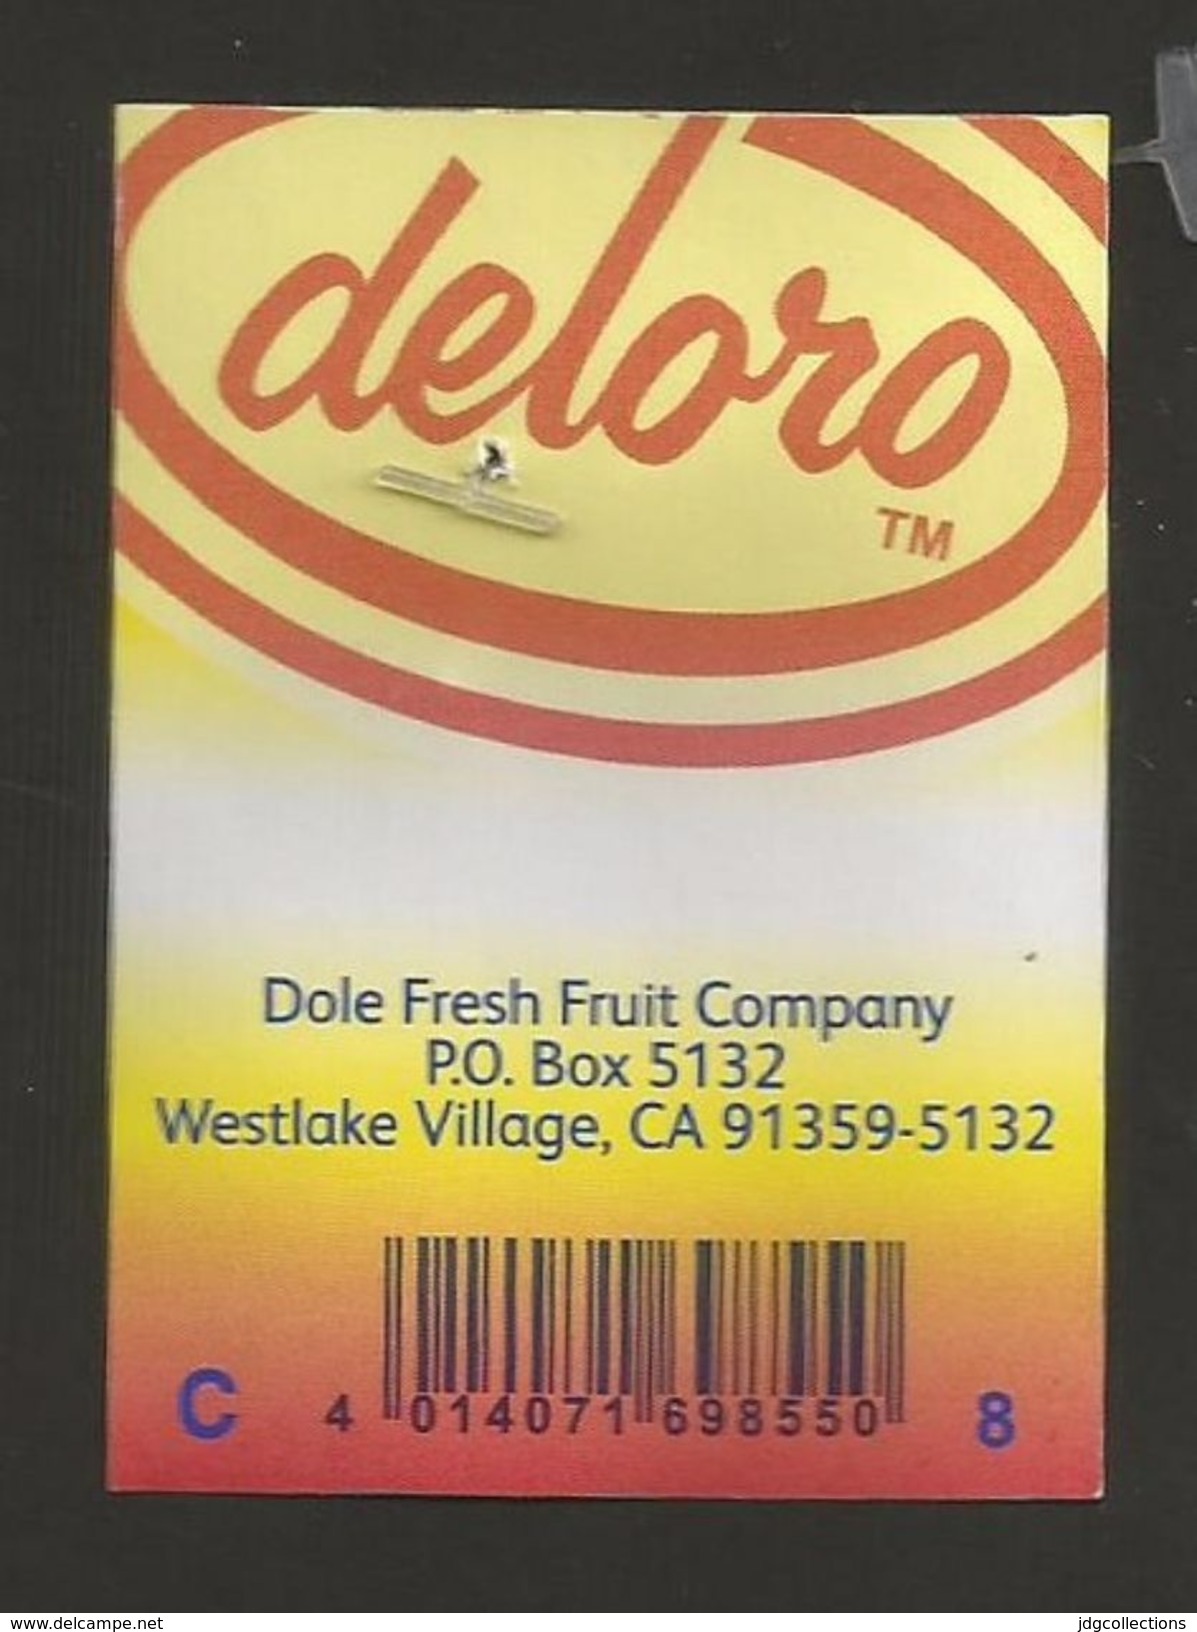 # PINEAPPLE DOLE DELORO SUPER SWEET Size 8 Fruit Tag Balise Etiqueta Anhanger Ananas Pina Costa Rica - Fruits & Vegetables